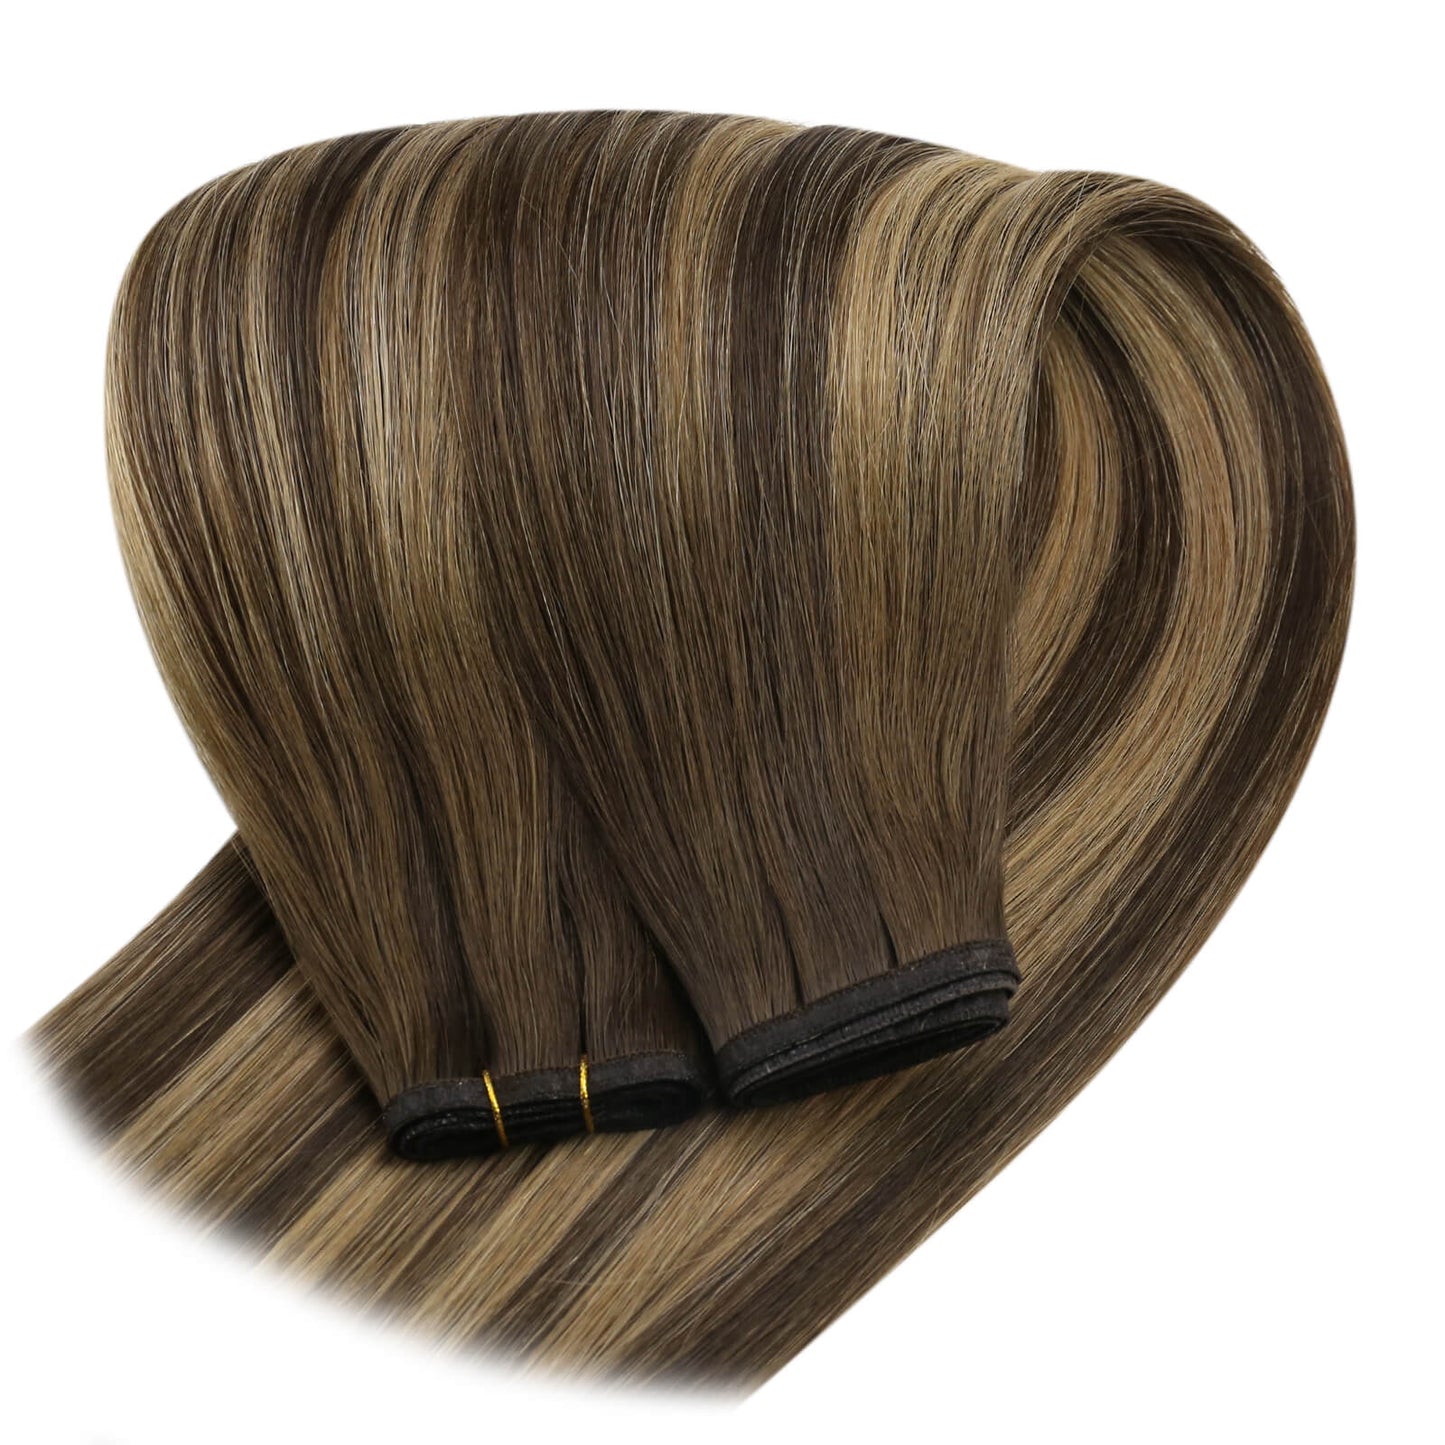 virgin human hair extensions balayage weft hair extensions for thin hair